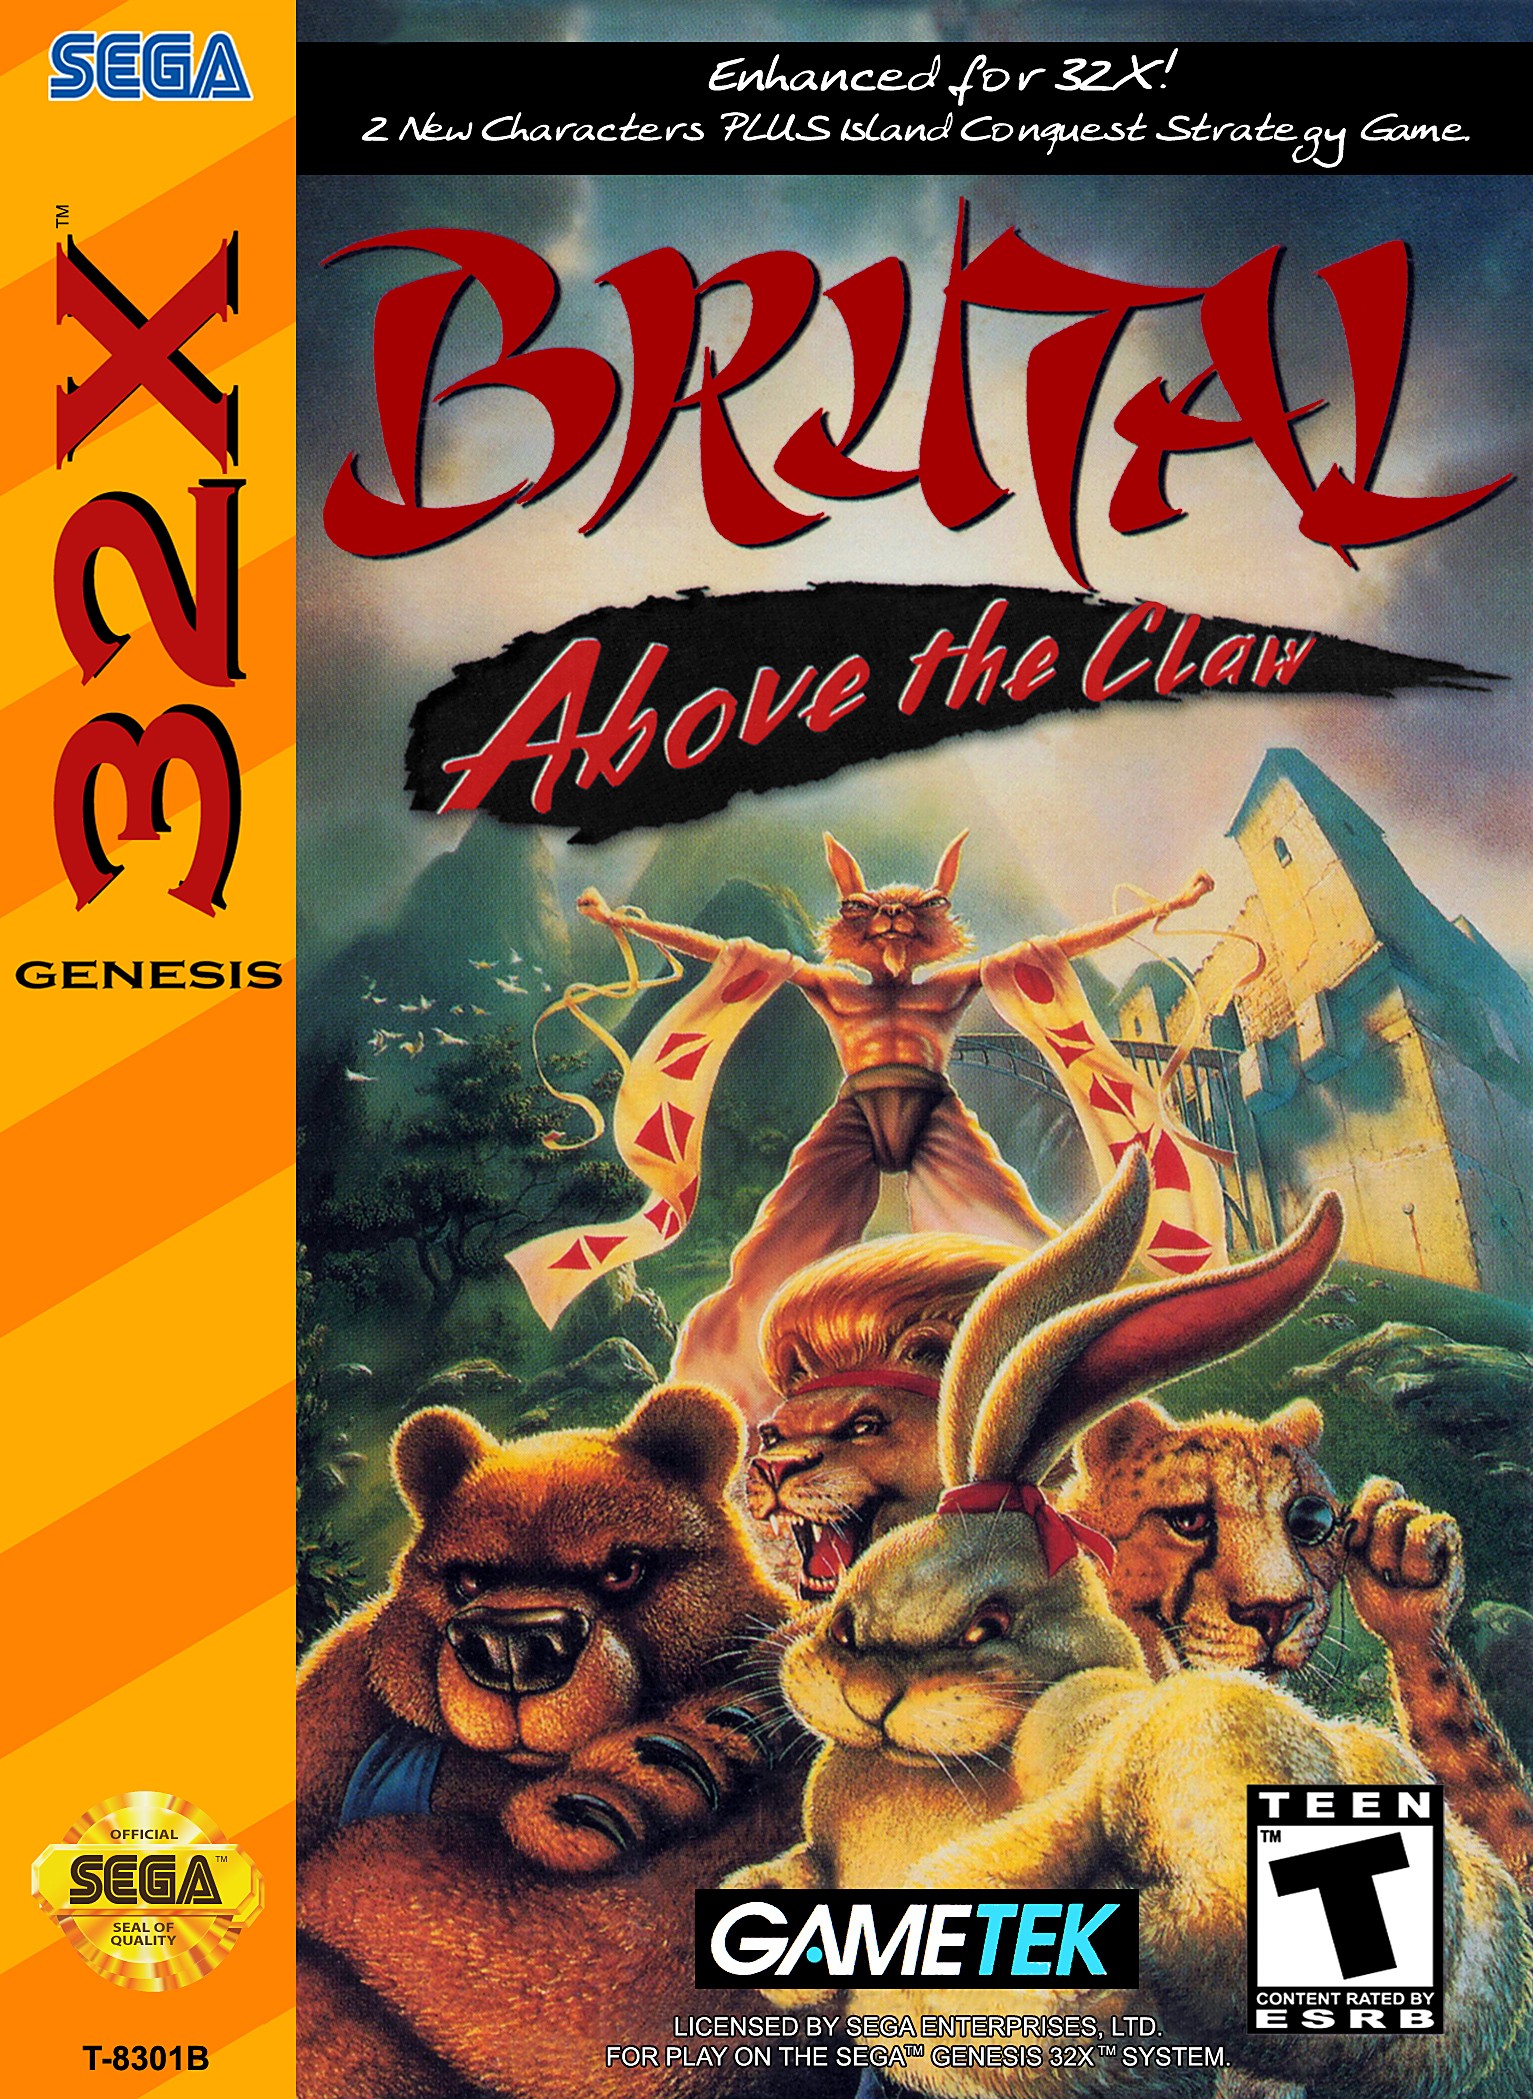 'Brutal: Above the Claw'